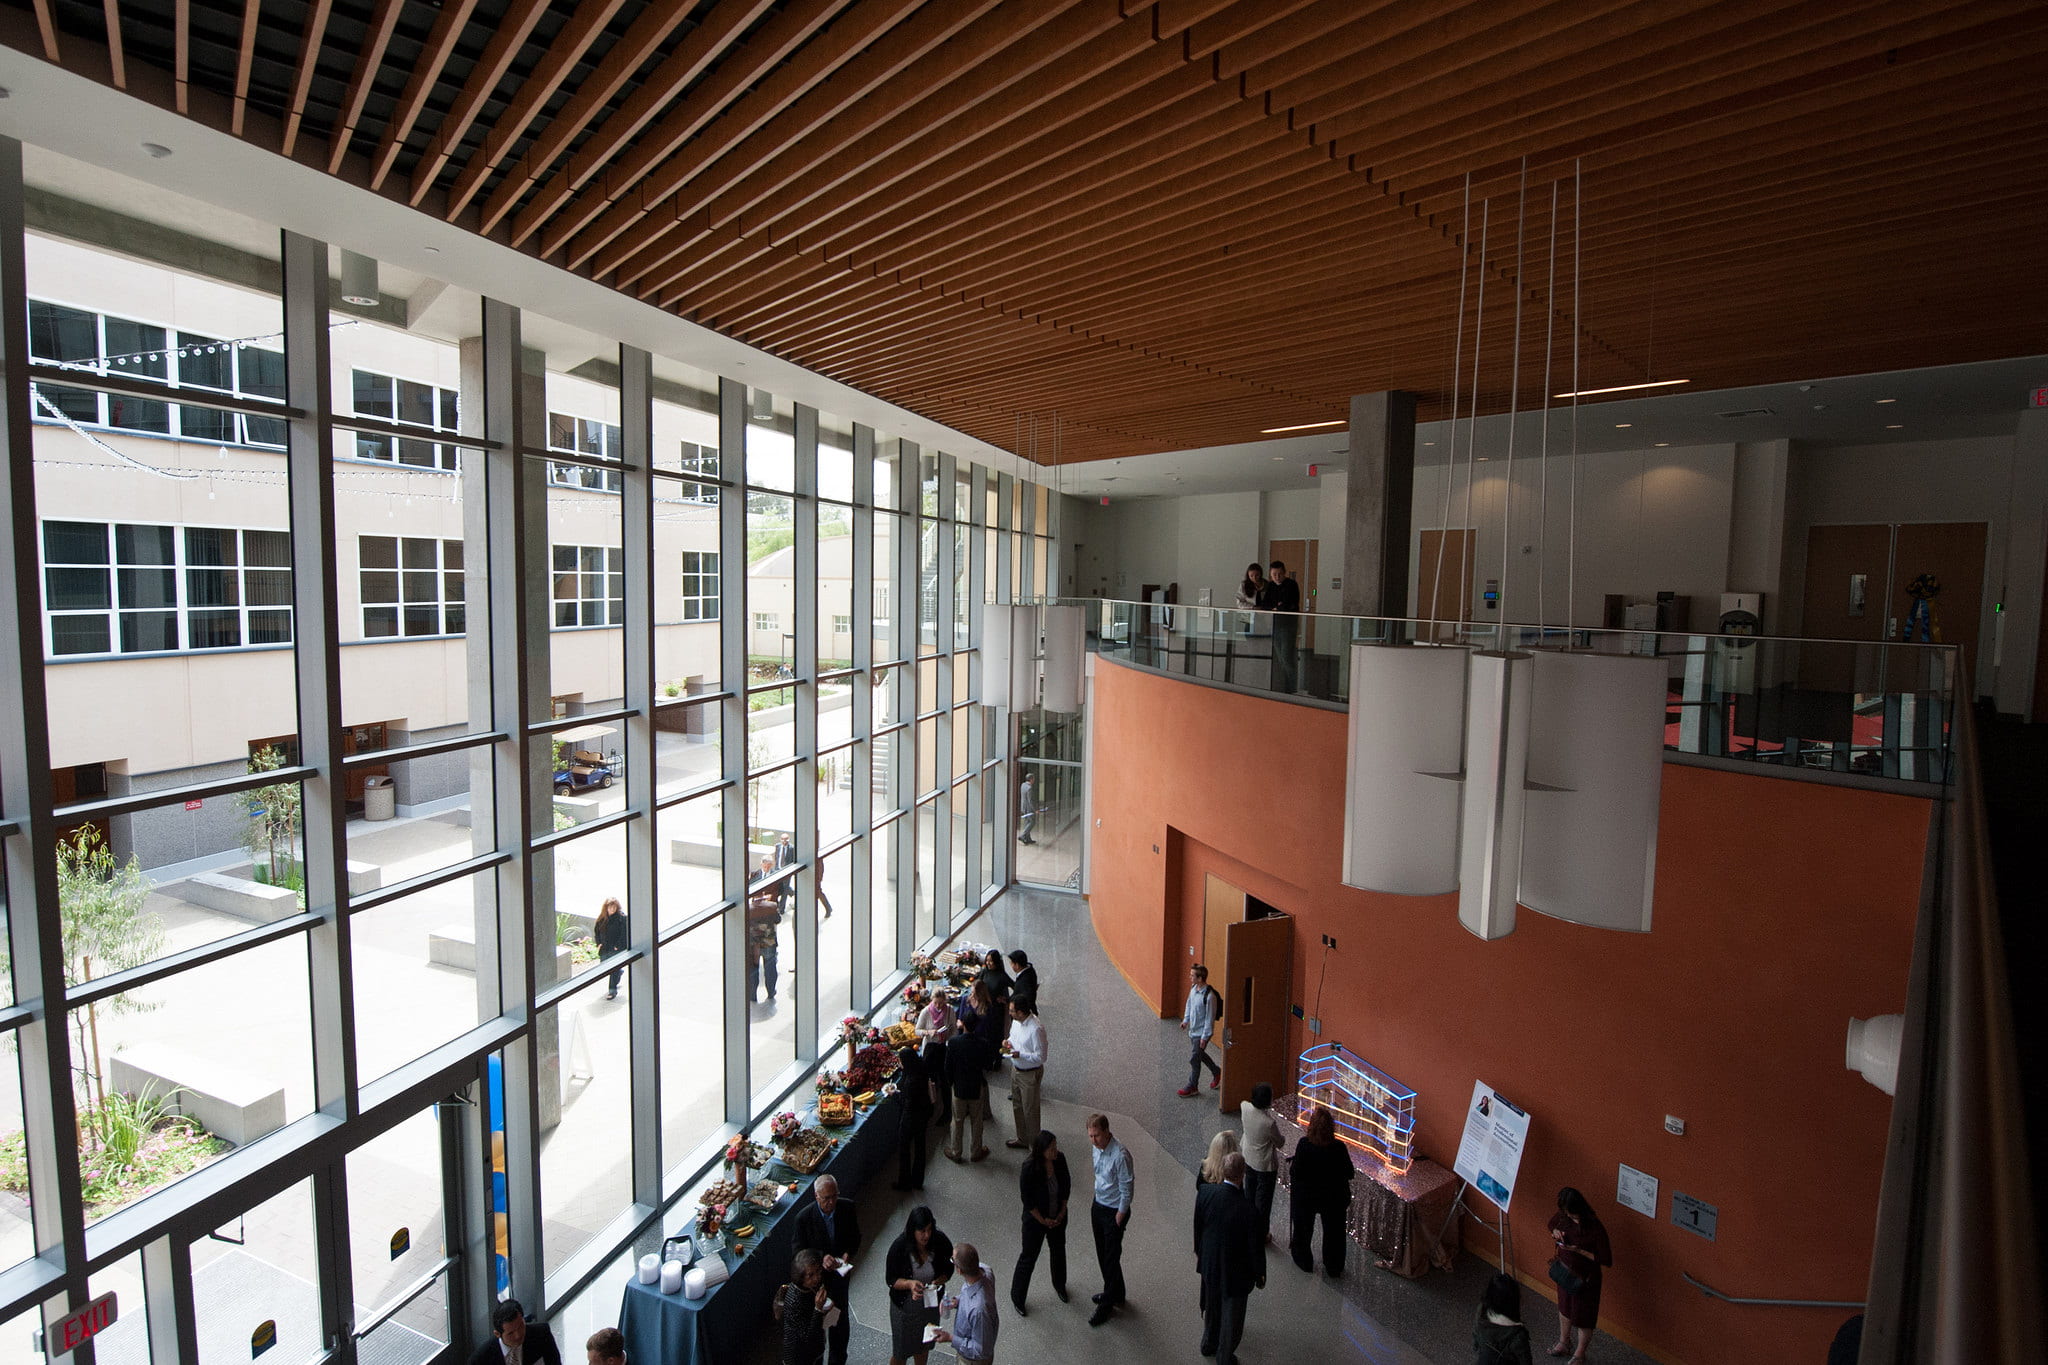 Hundreds of people attended this month’s grand opening of The Paul Merage School of Business’ new building